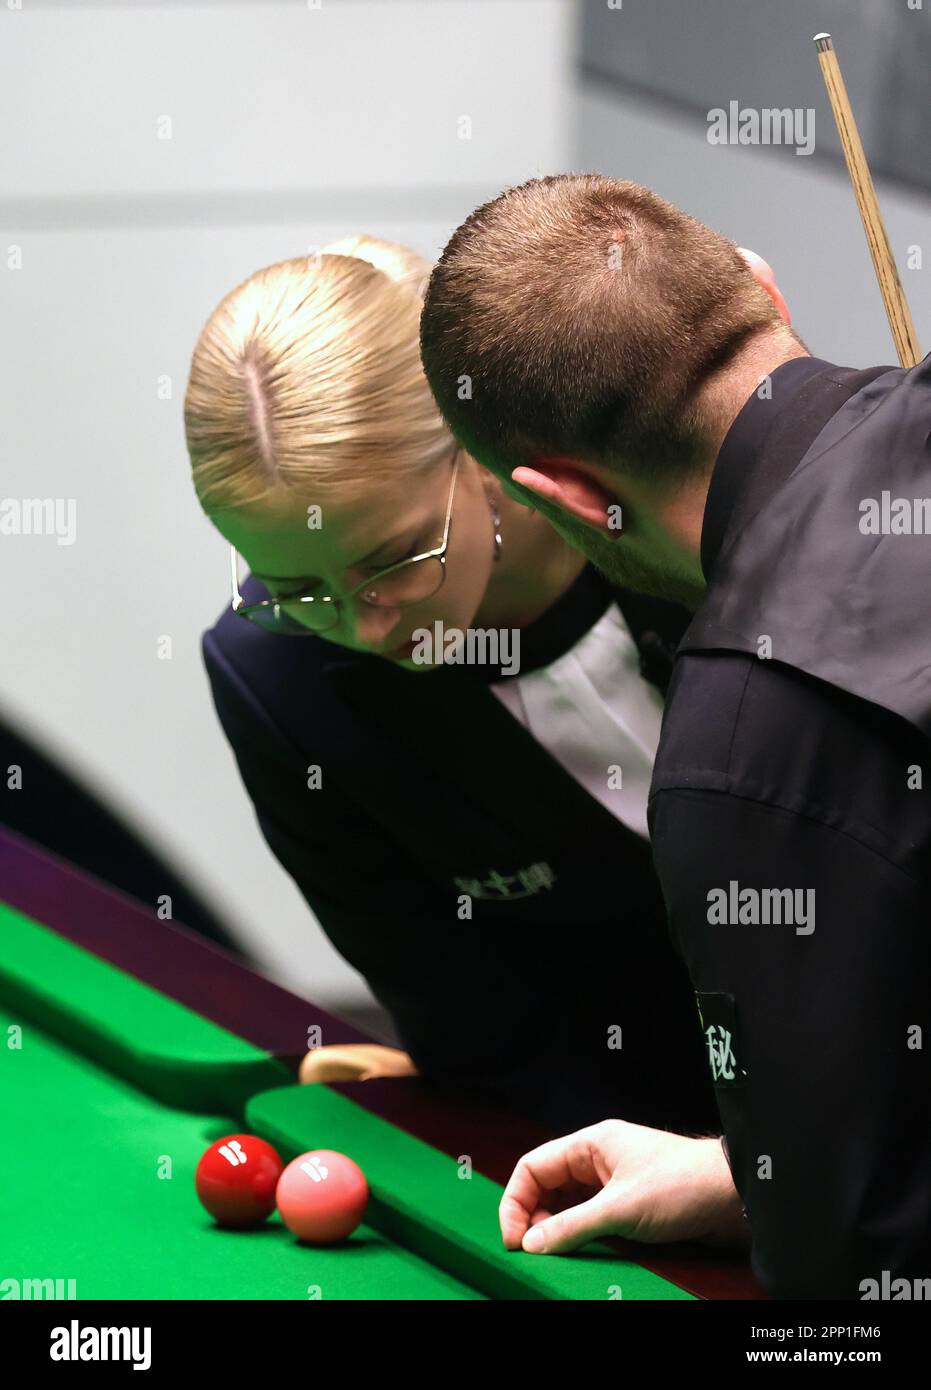 Mark Allen (right) and referee Desislava Bozhilova inspect a red and the pink during the match against Stuart Bingham during day seven of the Cazoo World Snooker Championship at the Crucible Theatre,